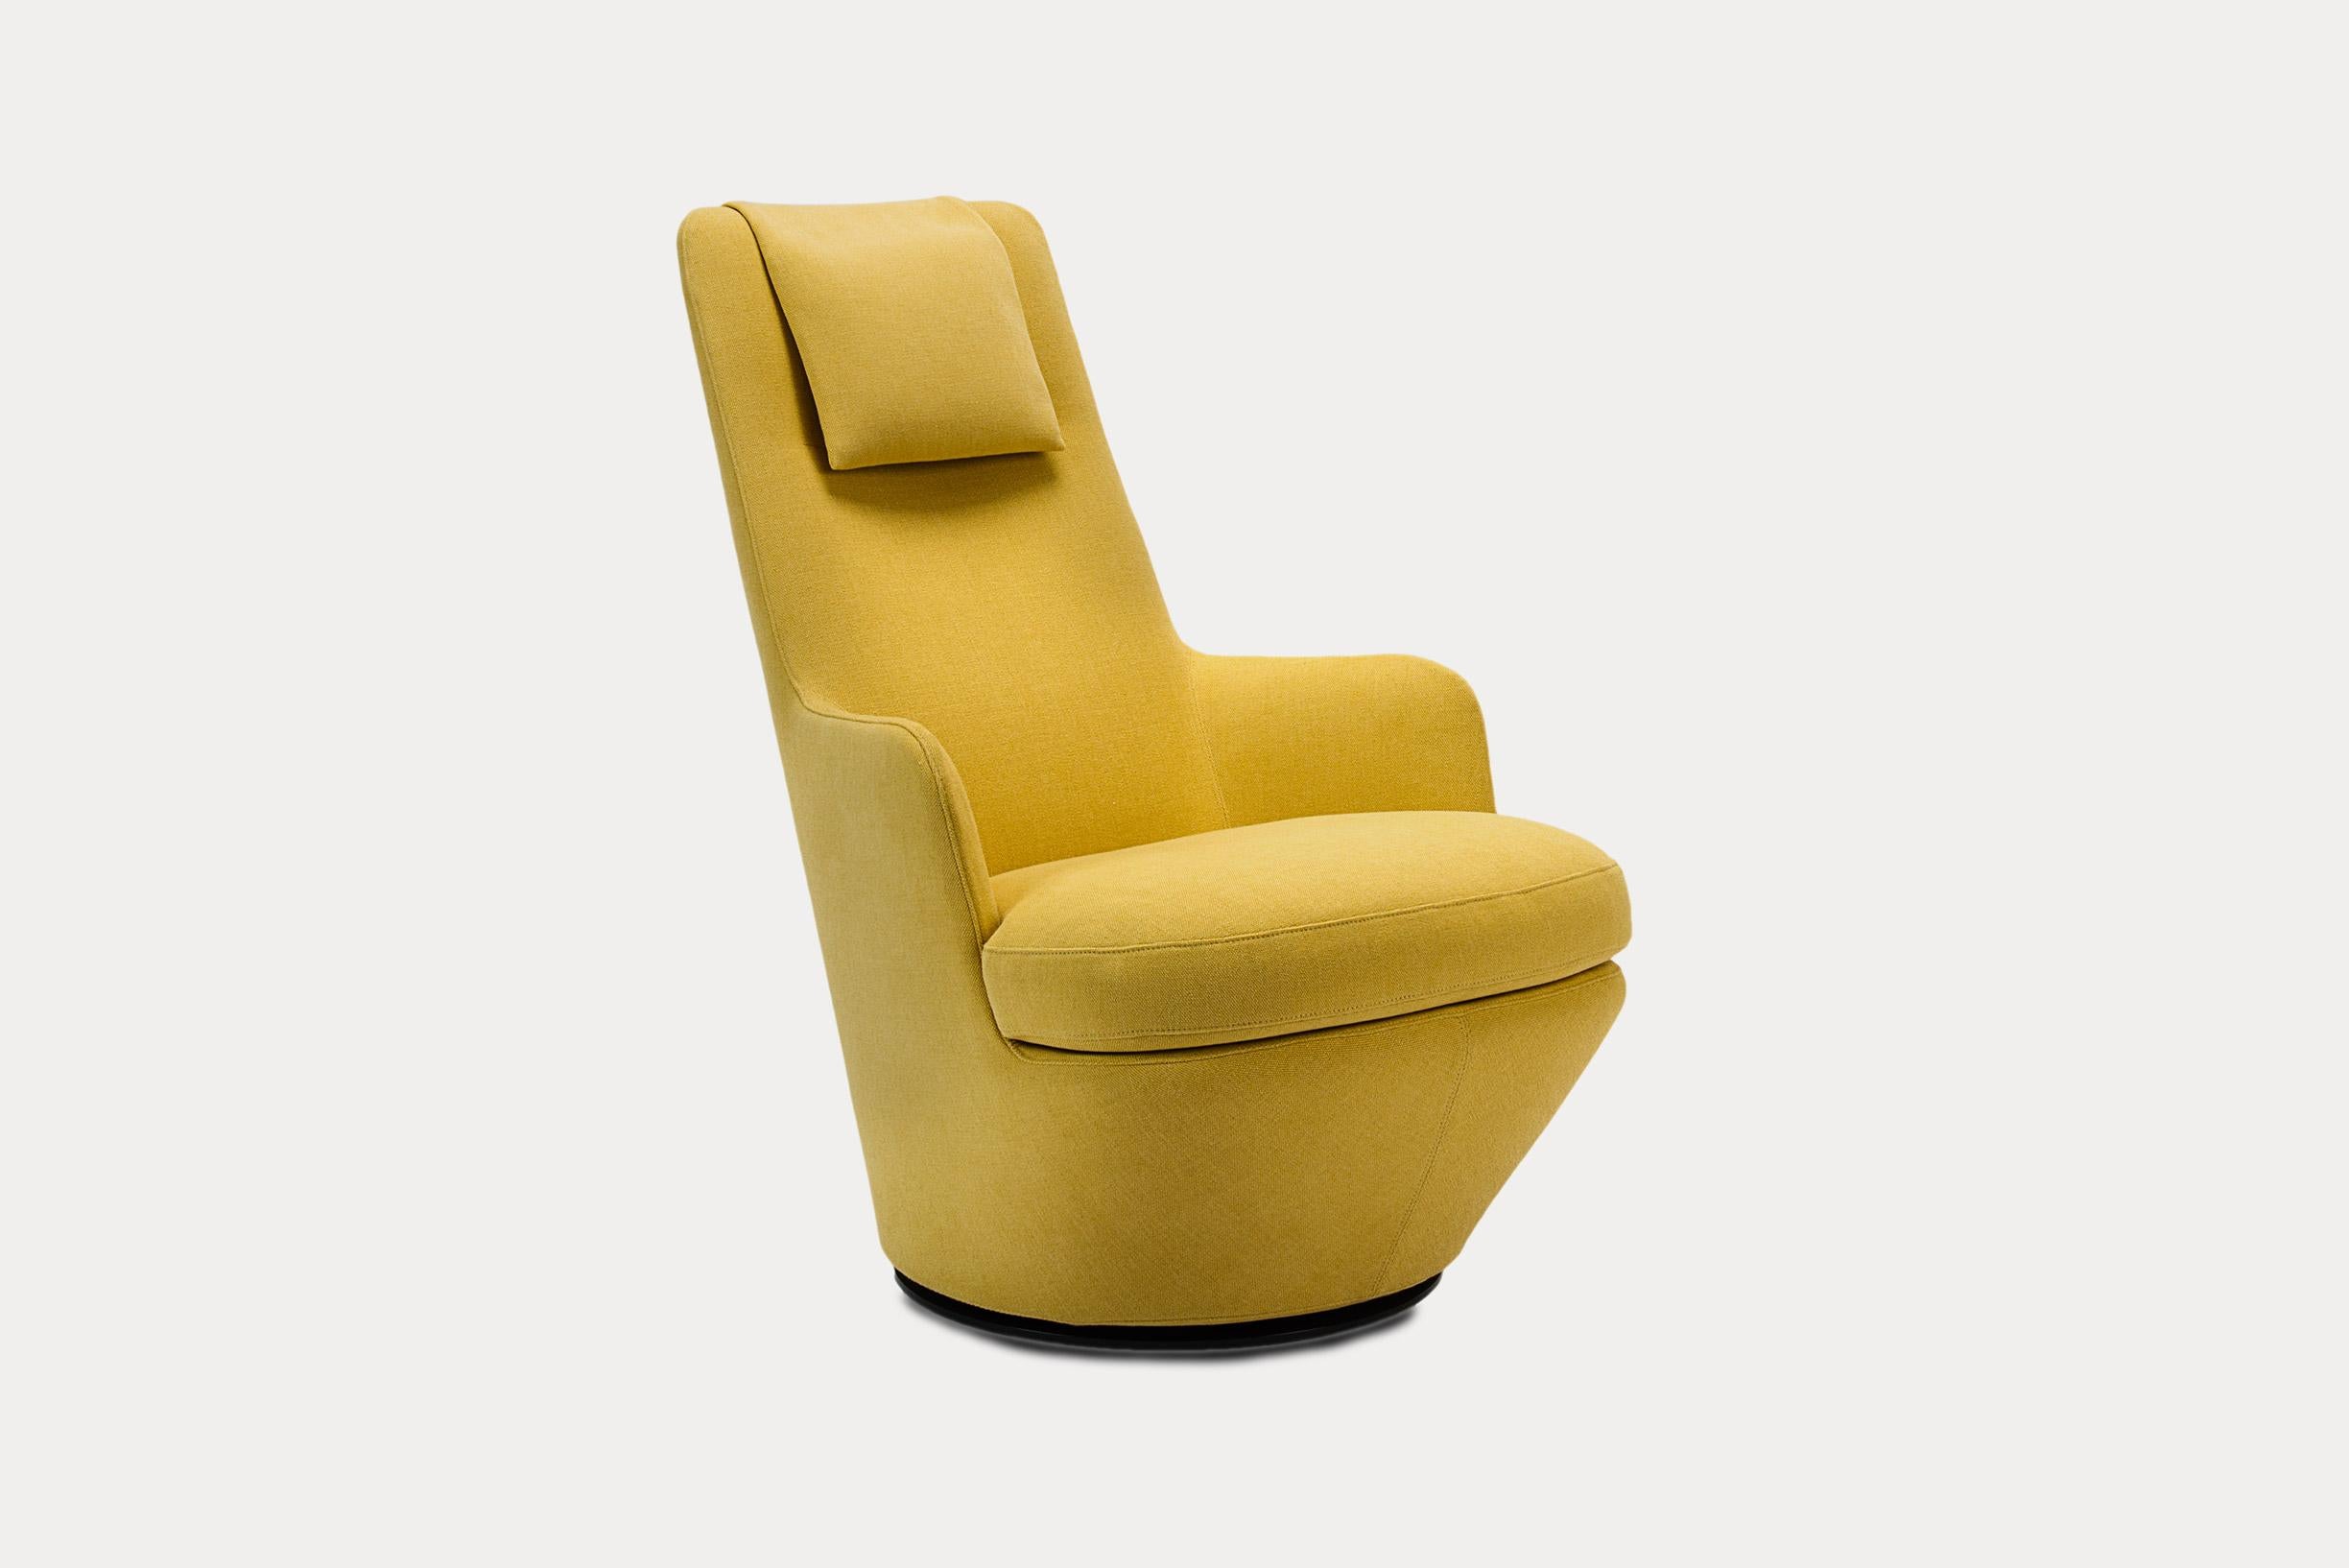 Hi Turn is a high-back swivel lounge chair with a discrete circular metal base that rotates smoothly through 360º. The combination of an internal steel frame, injection molded cold foam and a soft down seat make for an inviting and comfortable chair